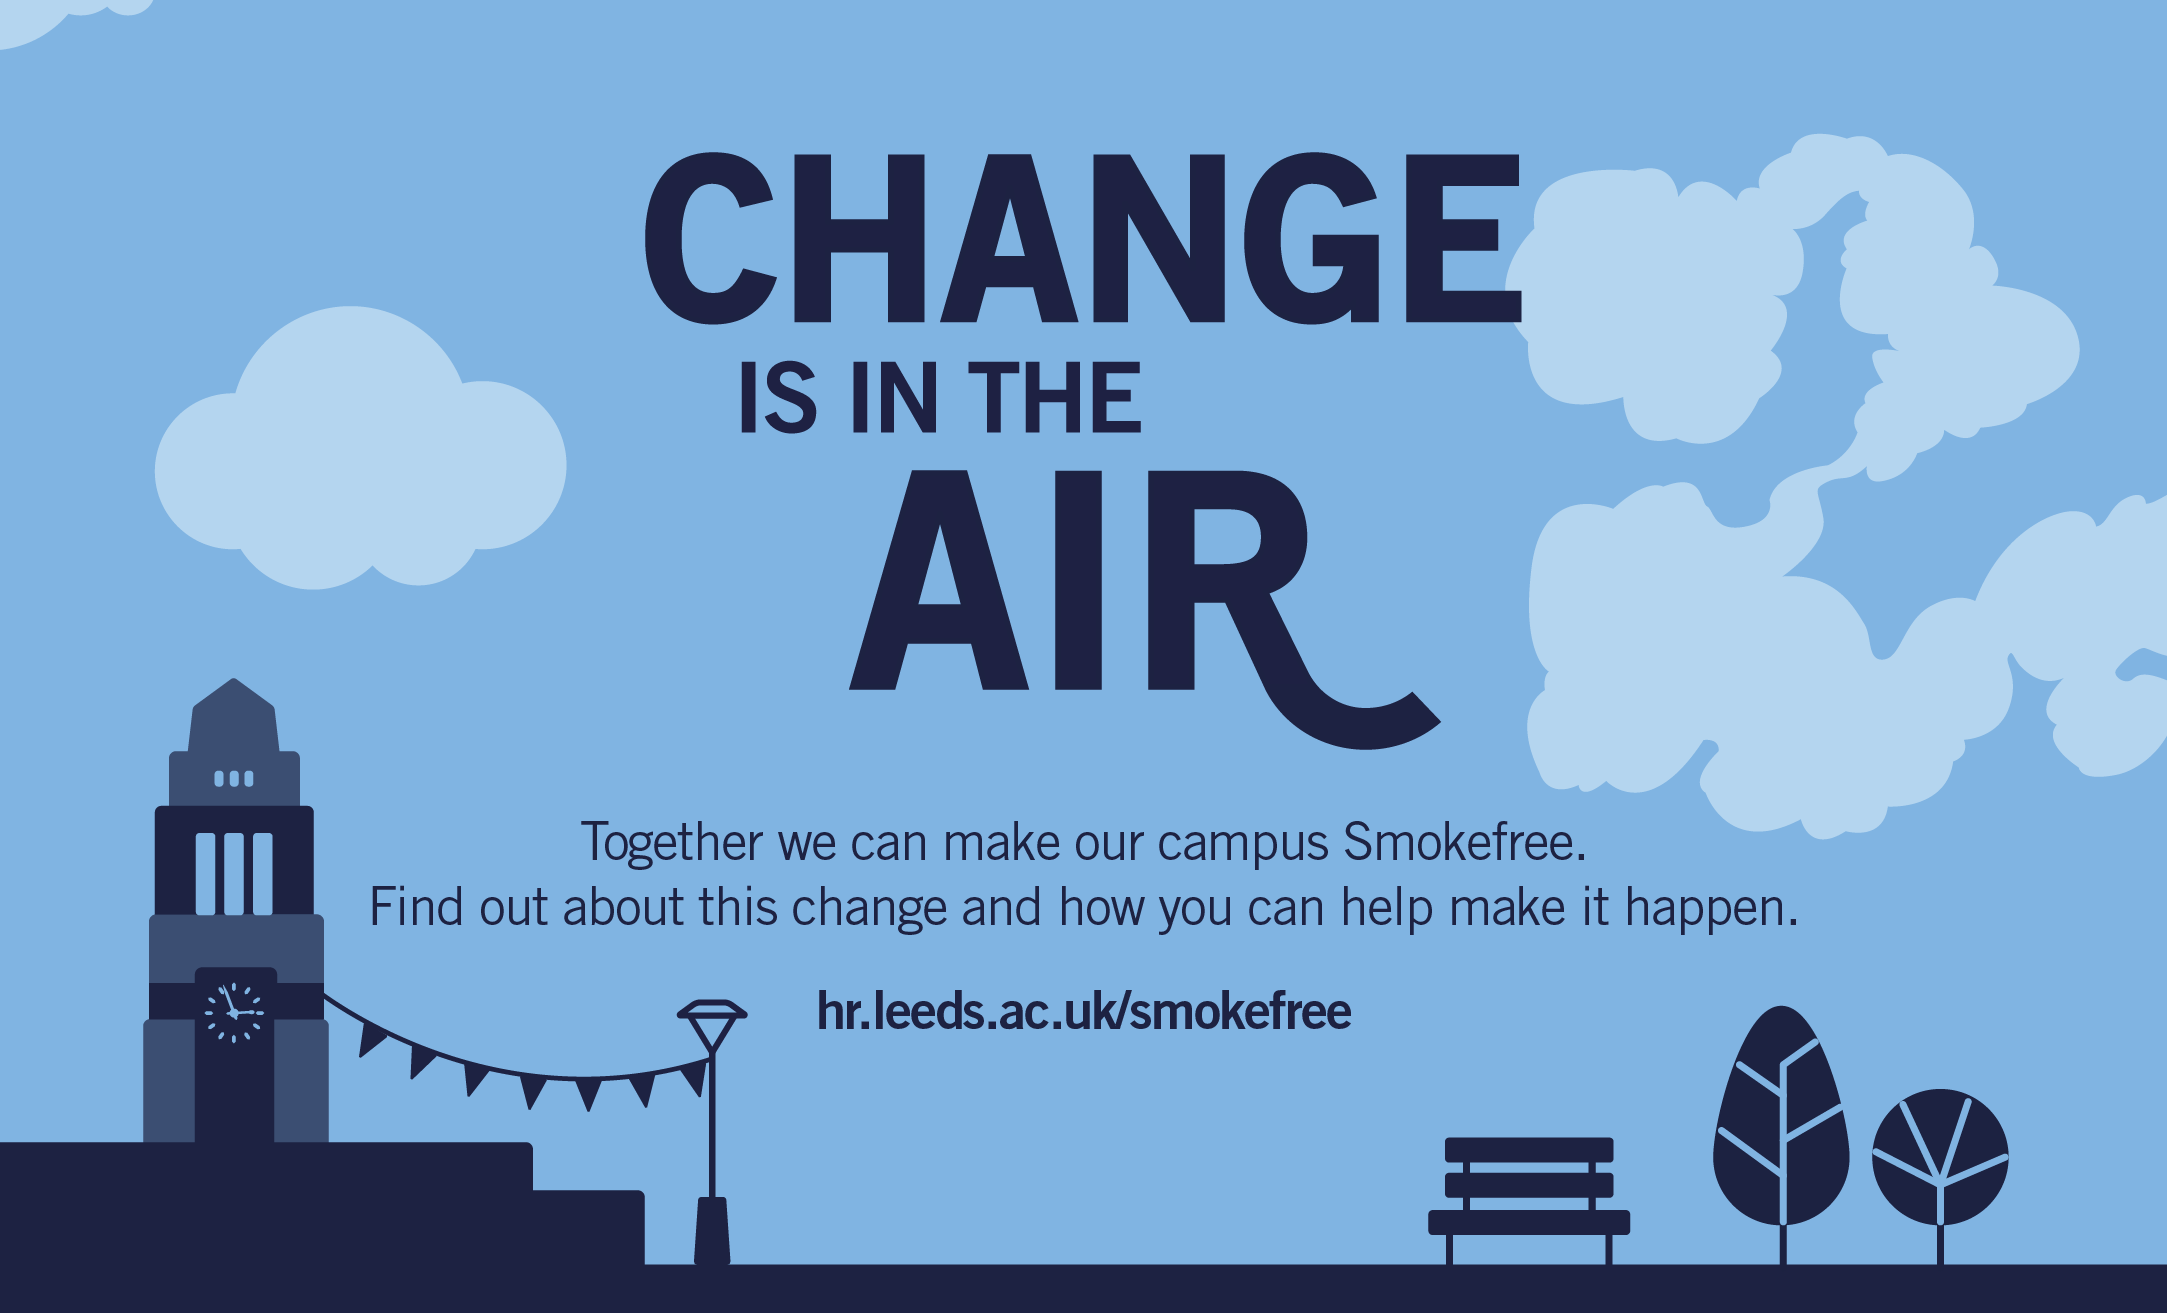 Change is in the air, together we can make our campus smokefree.